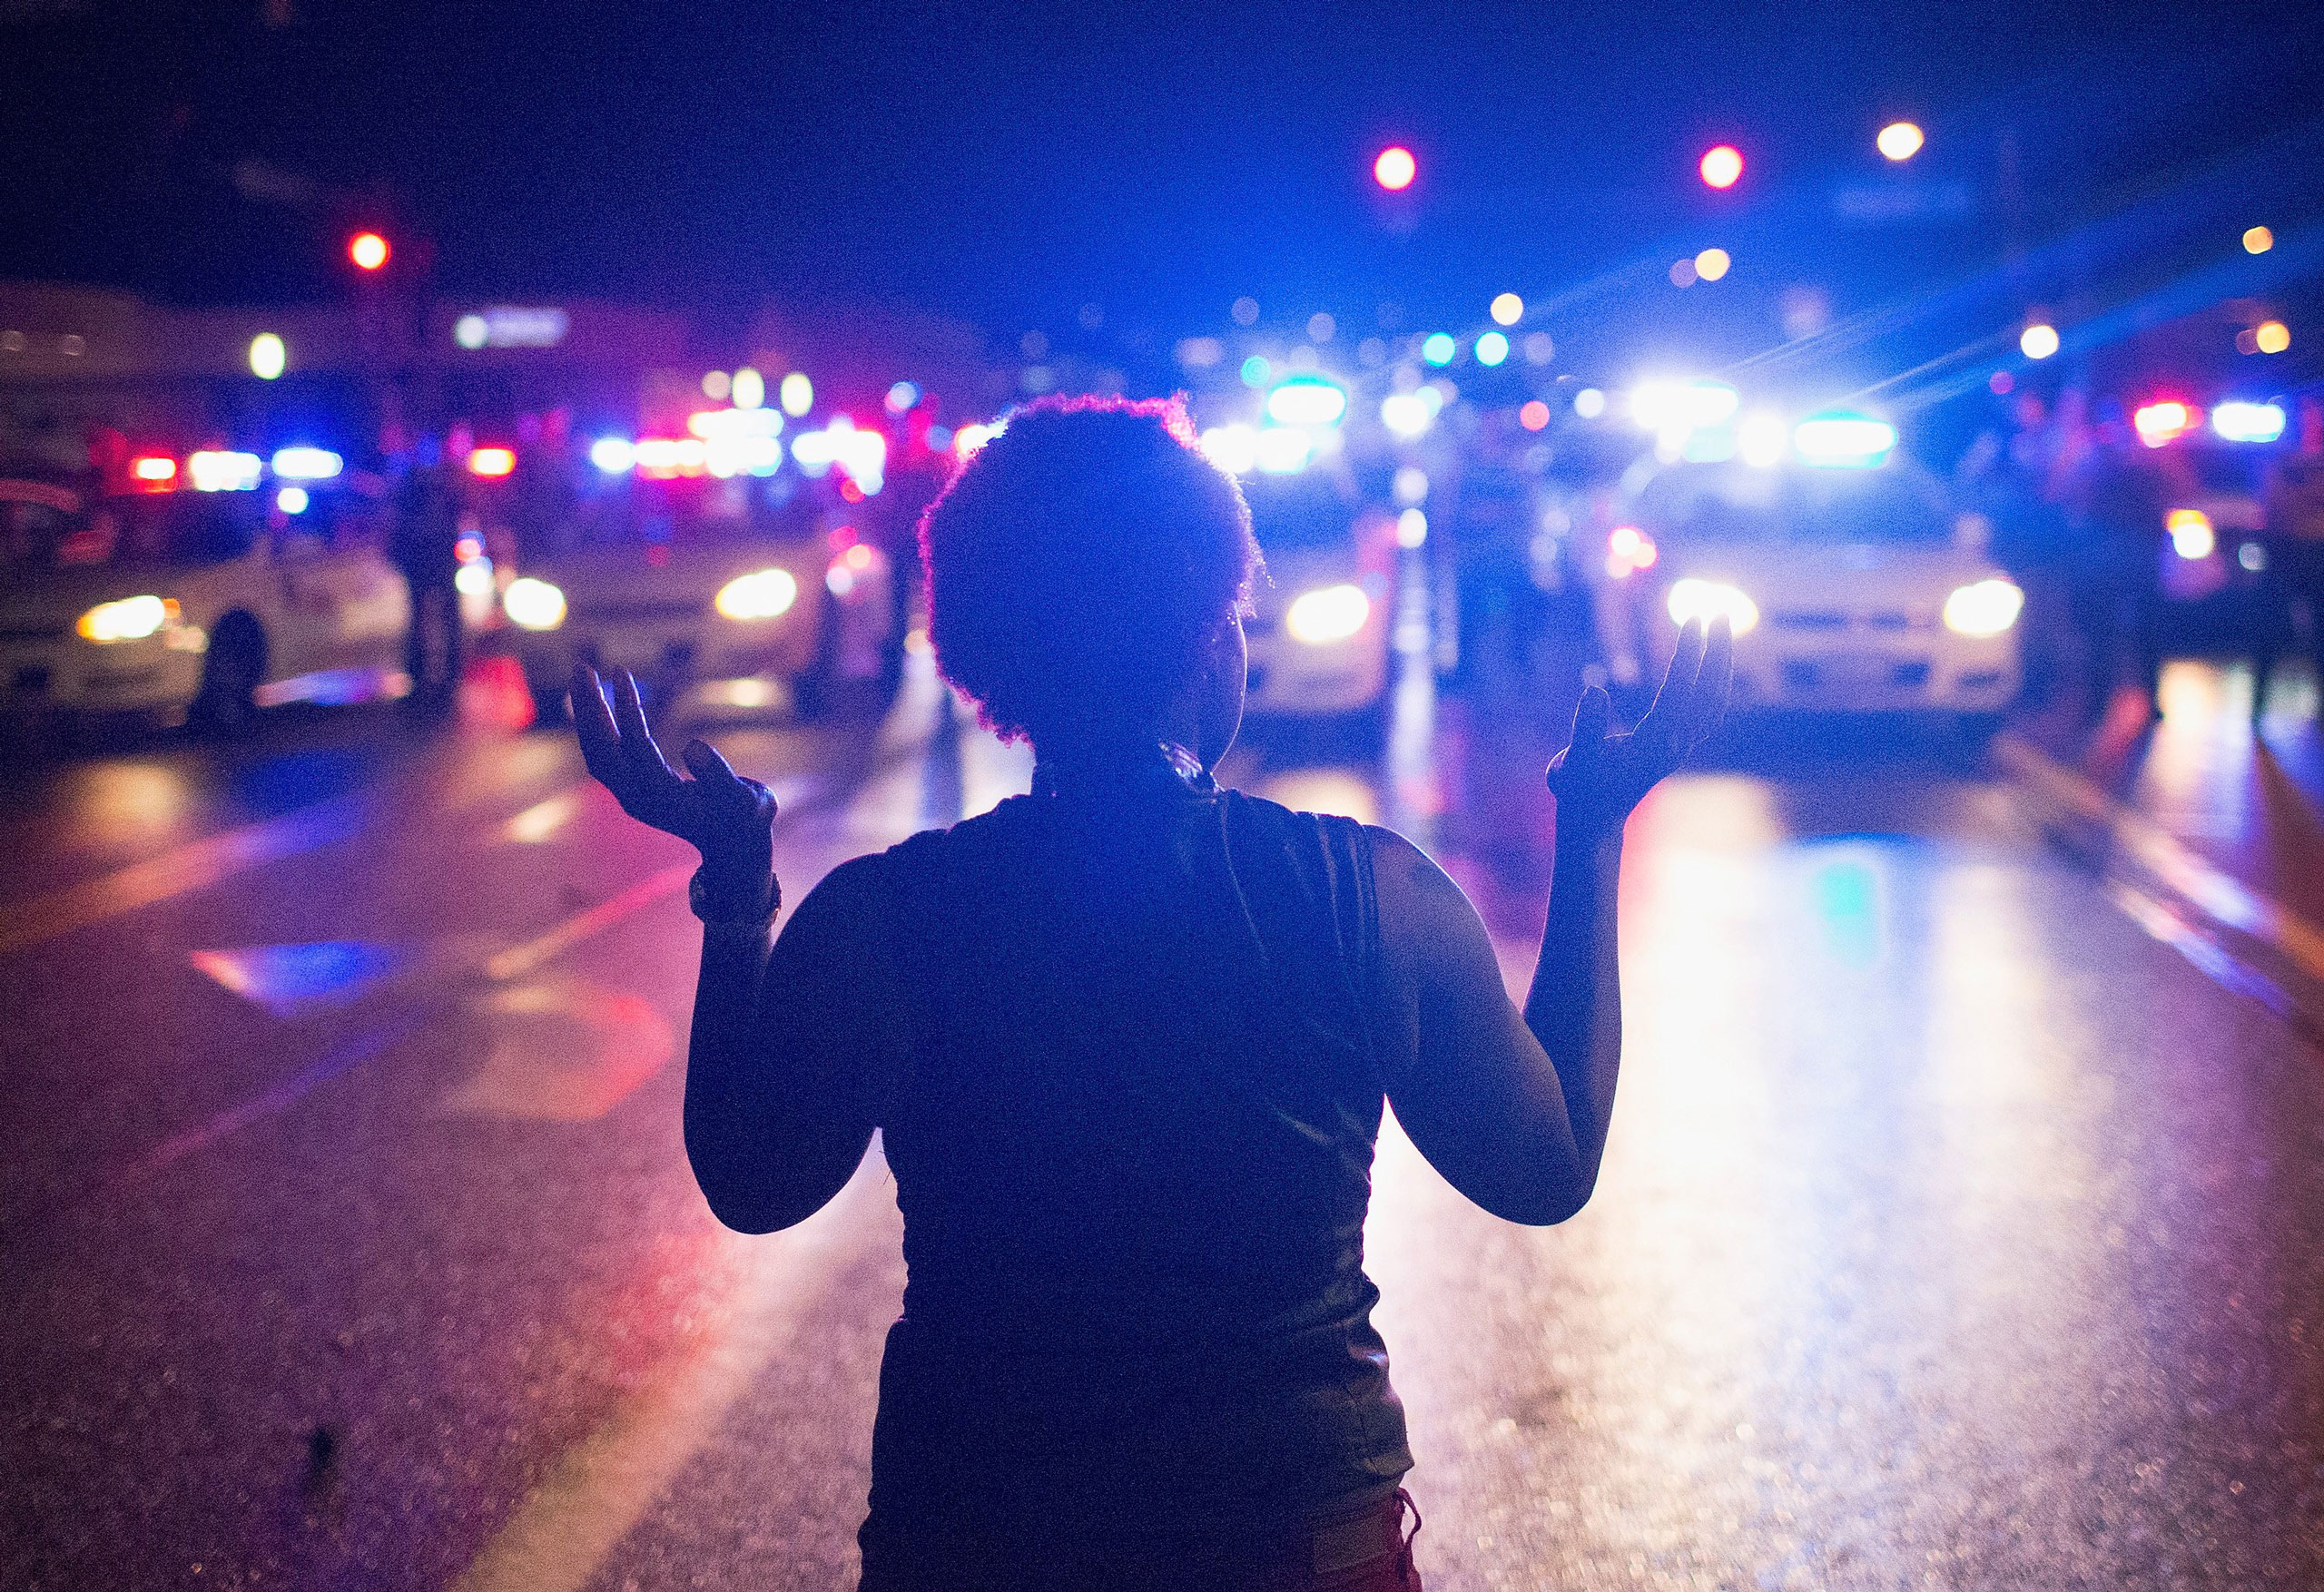 Demonstrators, marking the one-year anniversary of the shooting of Michael Brown, face off with police during a protest along West Florrisant Street in Ferguson, Mo., on August 9, 2015.